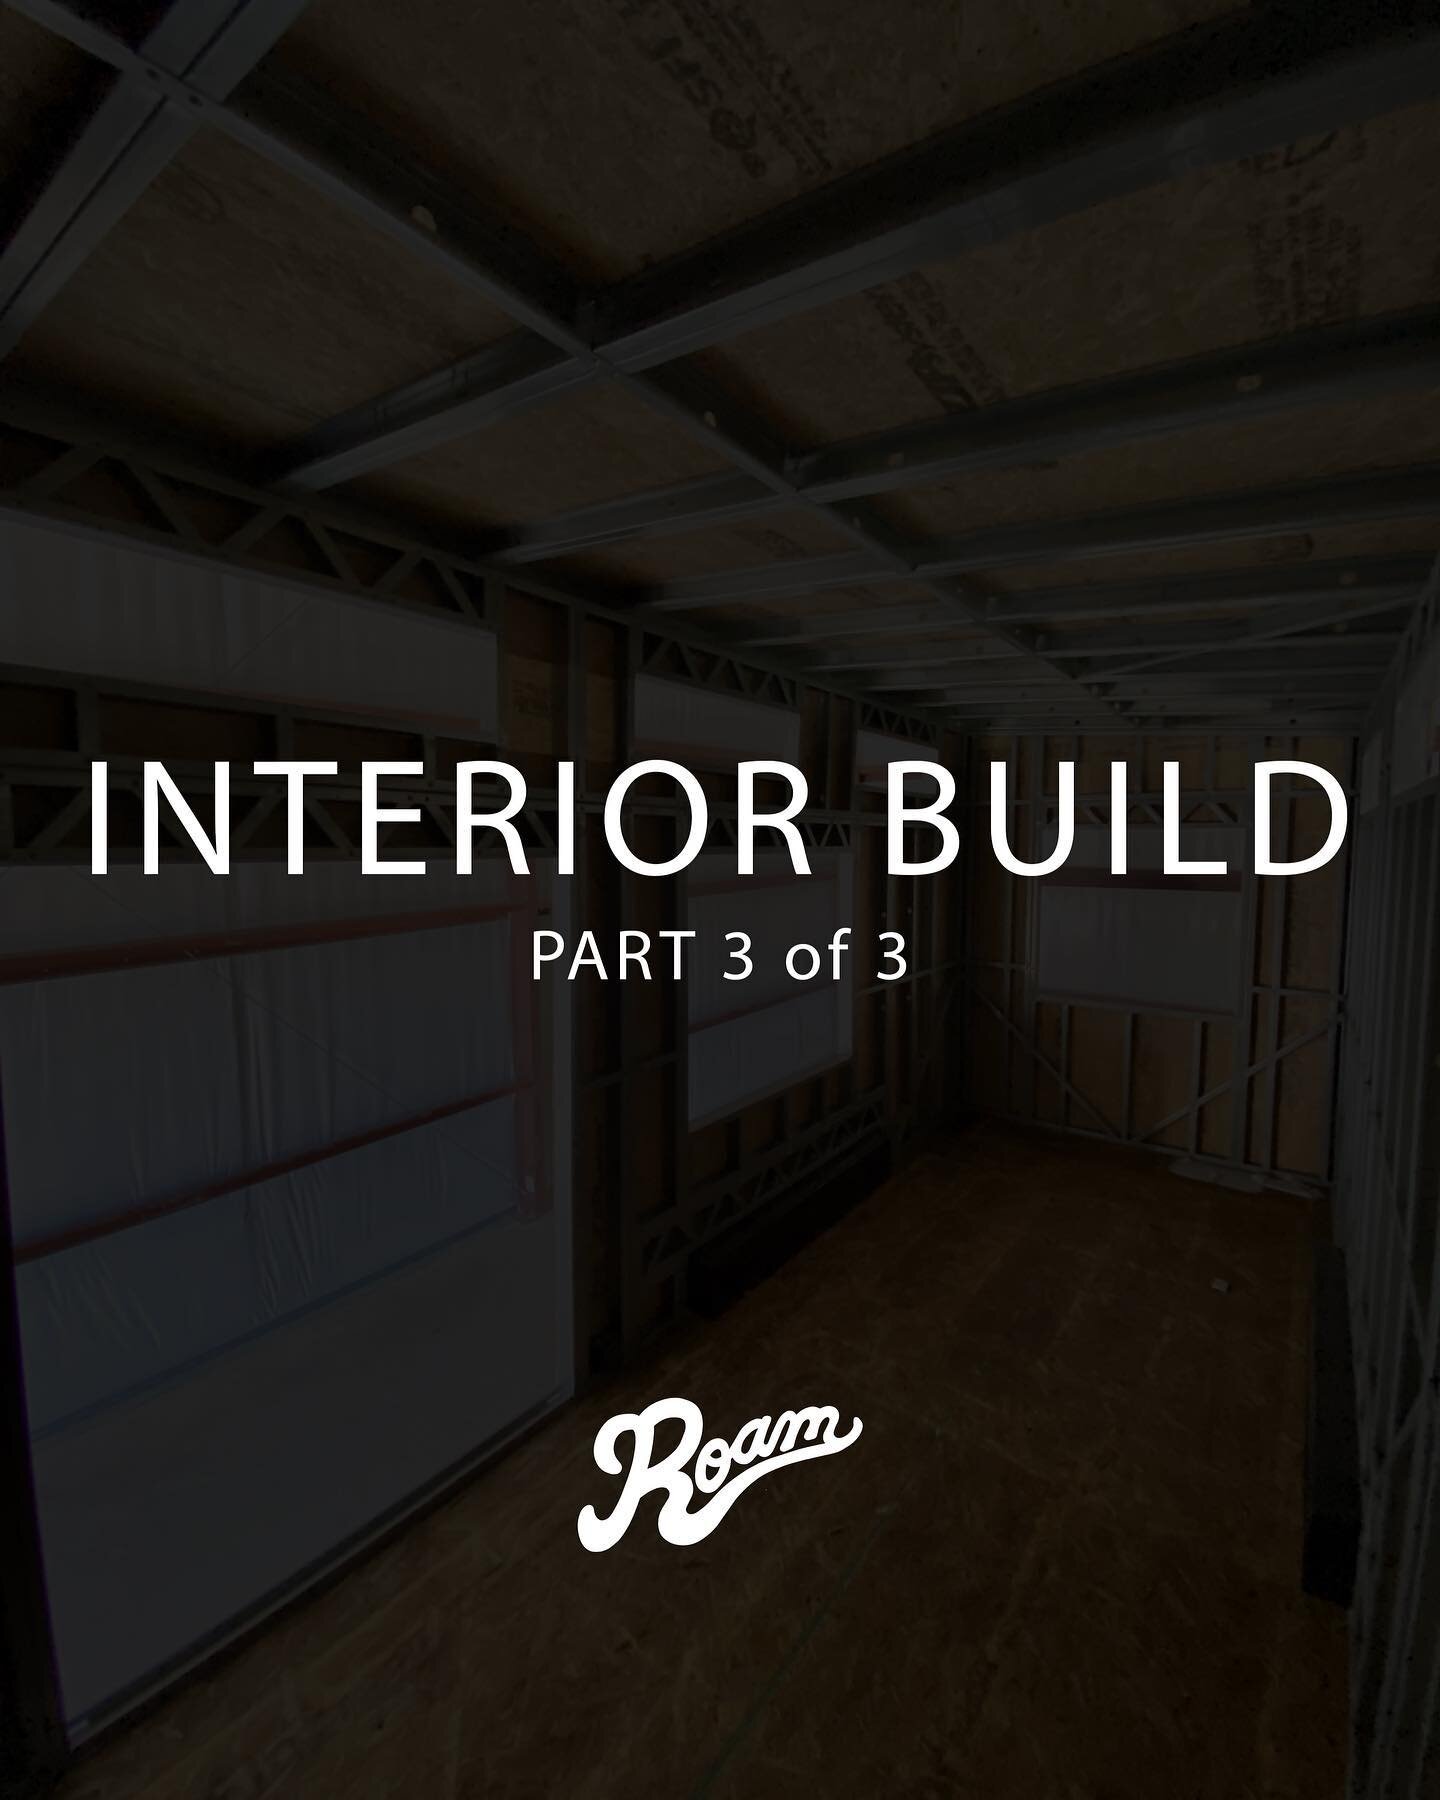 Part 3 of 3 &mdash; Interior build

After hours and hours of measuring and measuring again, googling tiny home inspo, scouring Pinterest, placing daily Amazon orders, and etc. we finally designed and pieced together the perfect interior for Roam. Bri